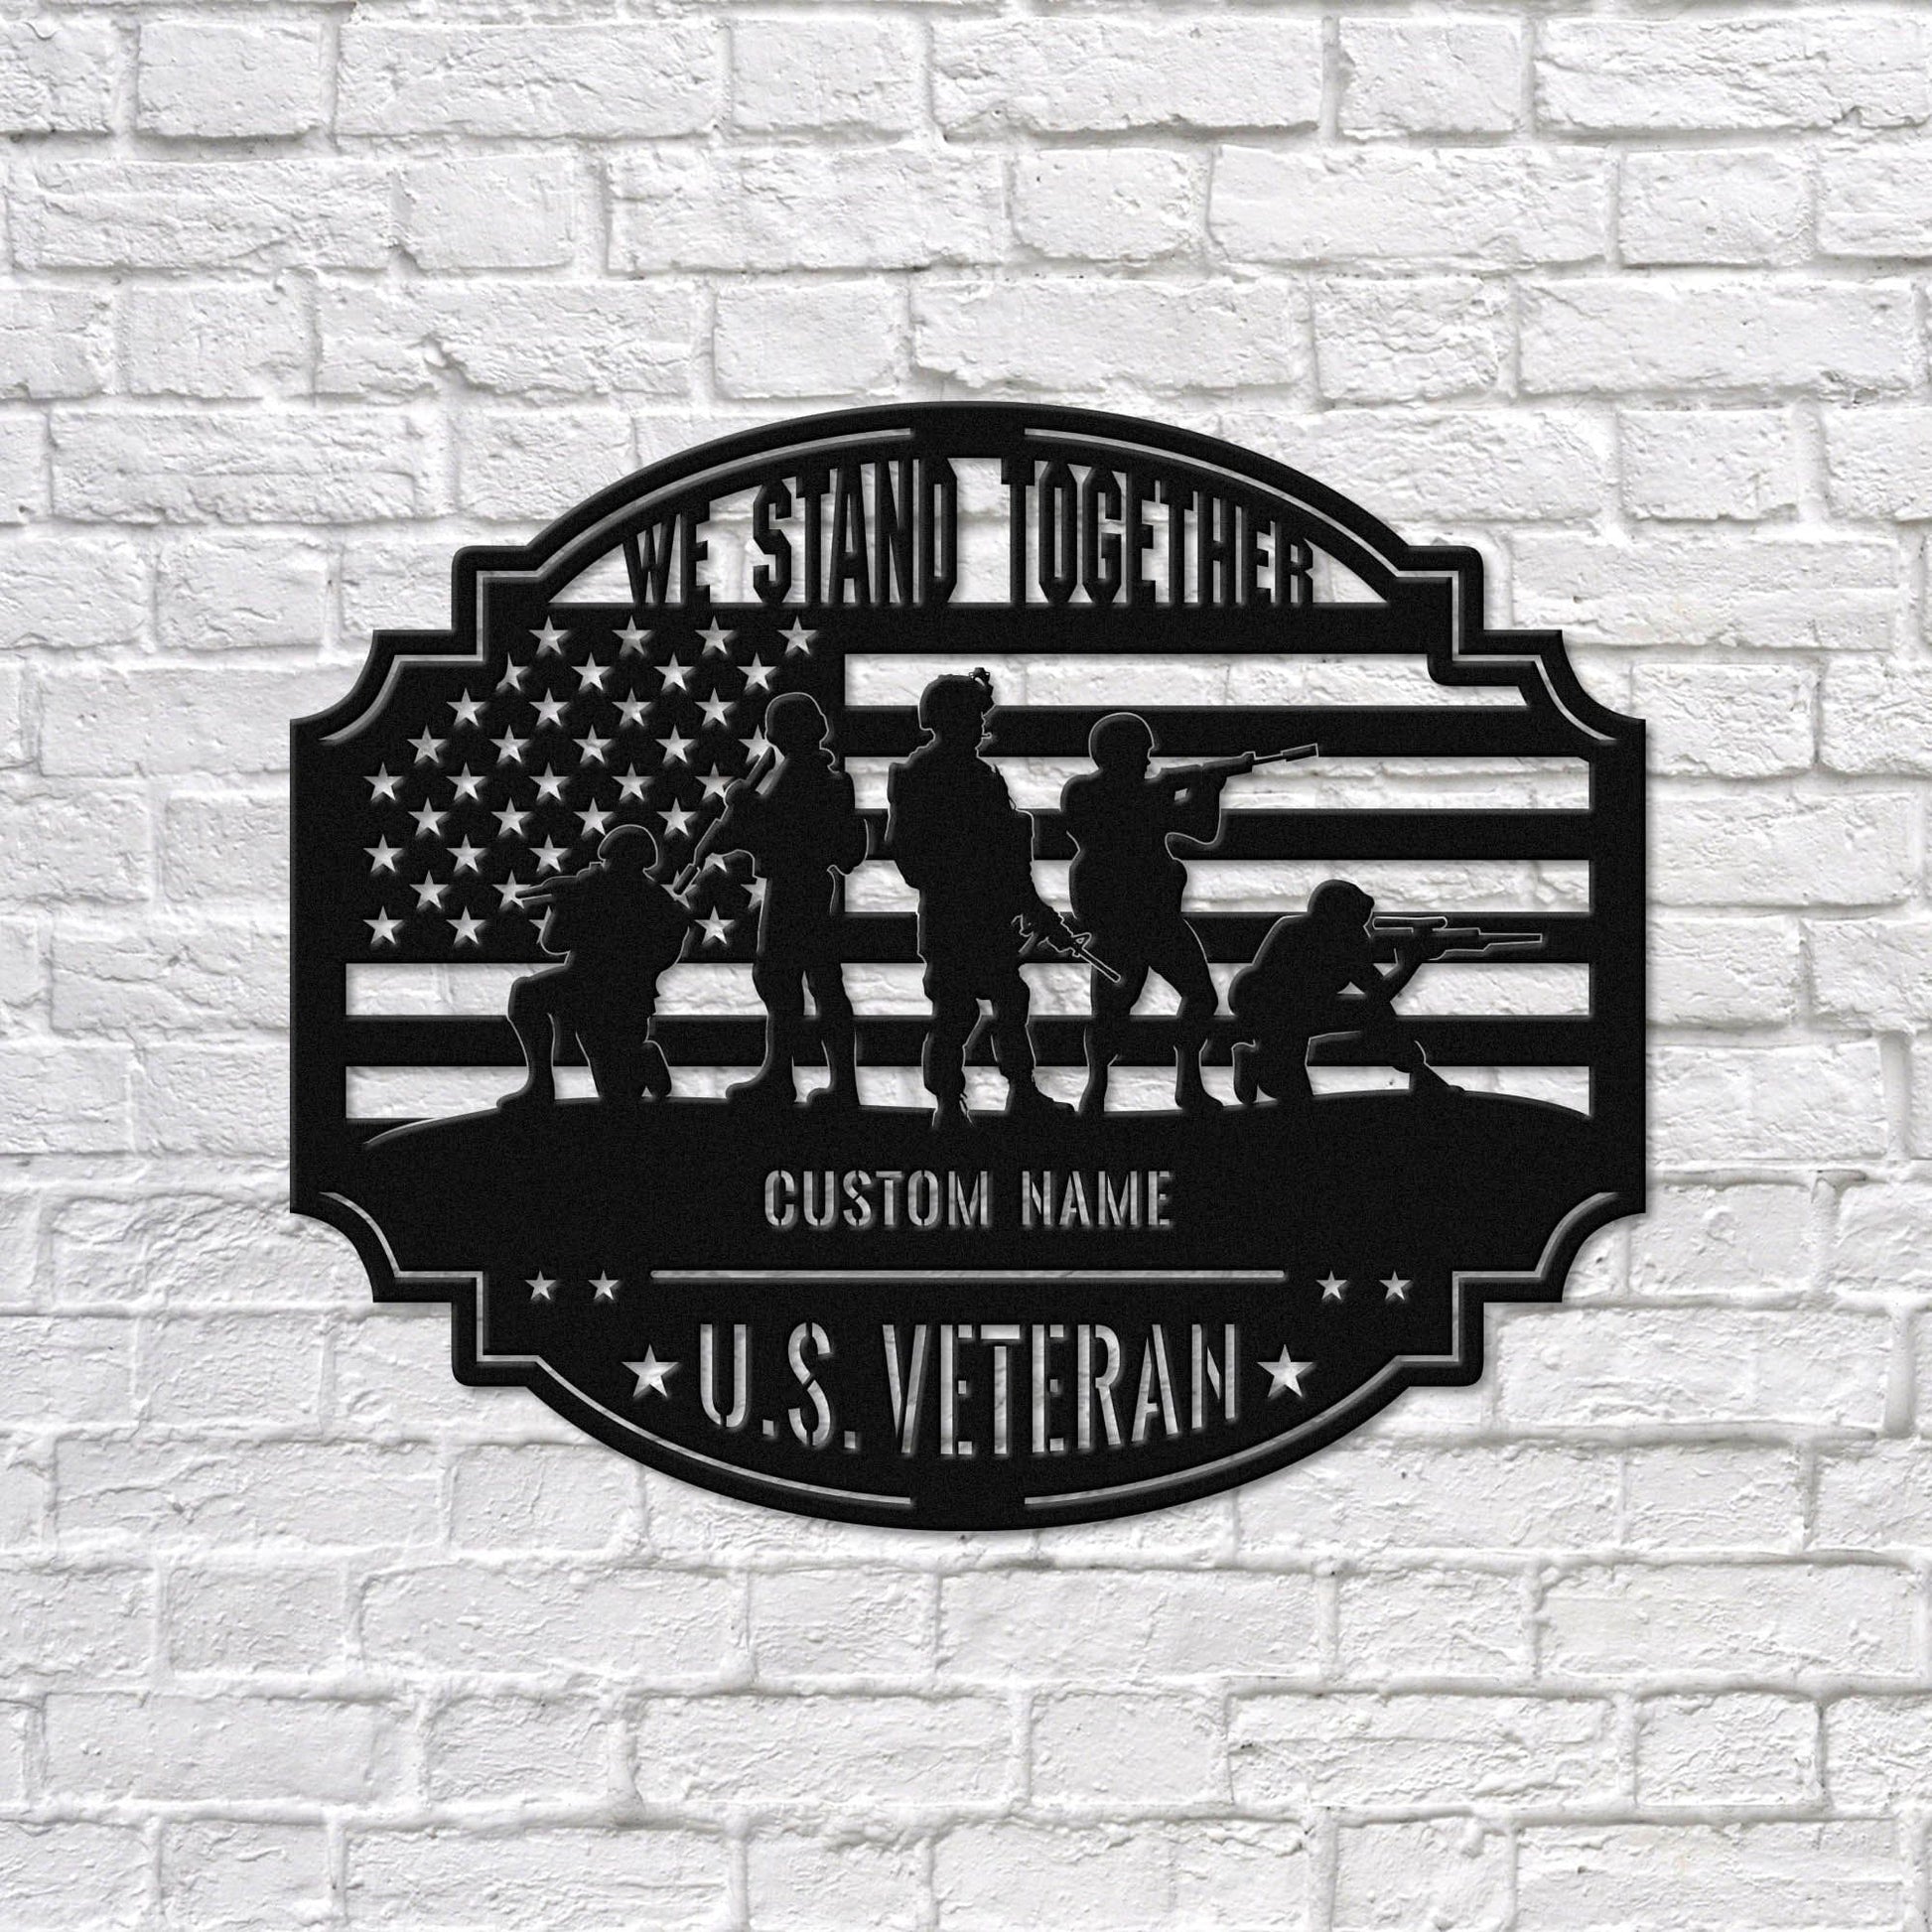 We Stand Together Metal Sign - Personalized U.S. Veteran Metal Wall Art - Gifts for Veteran